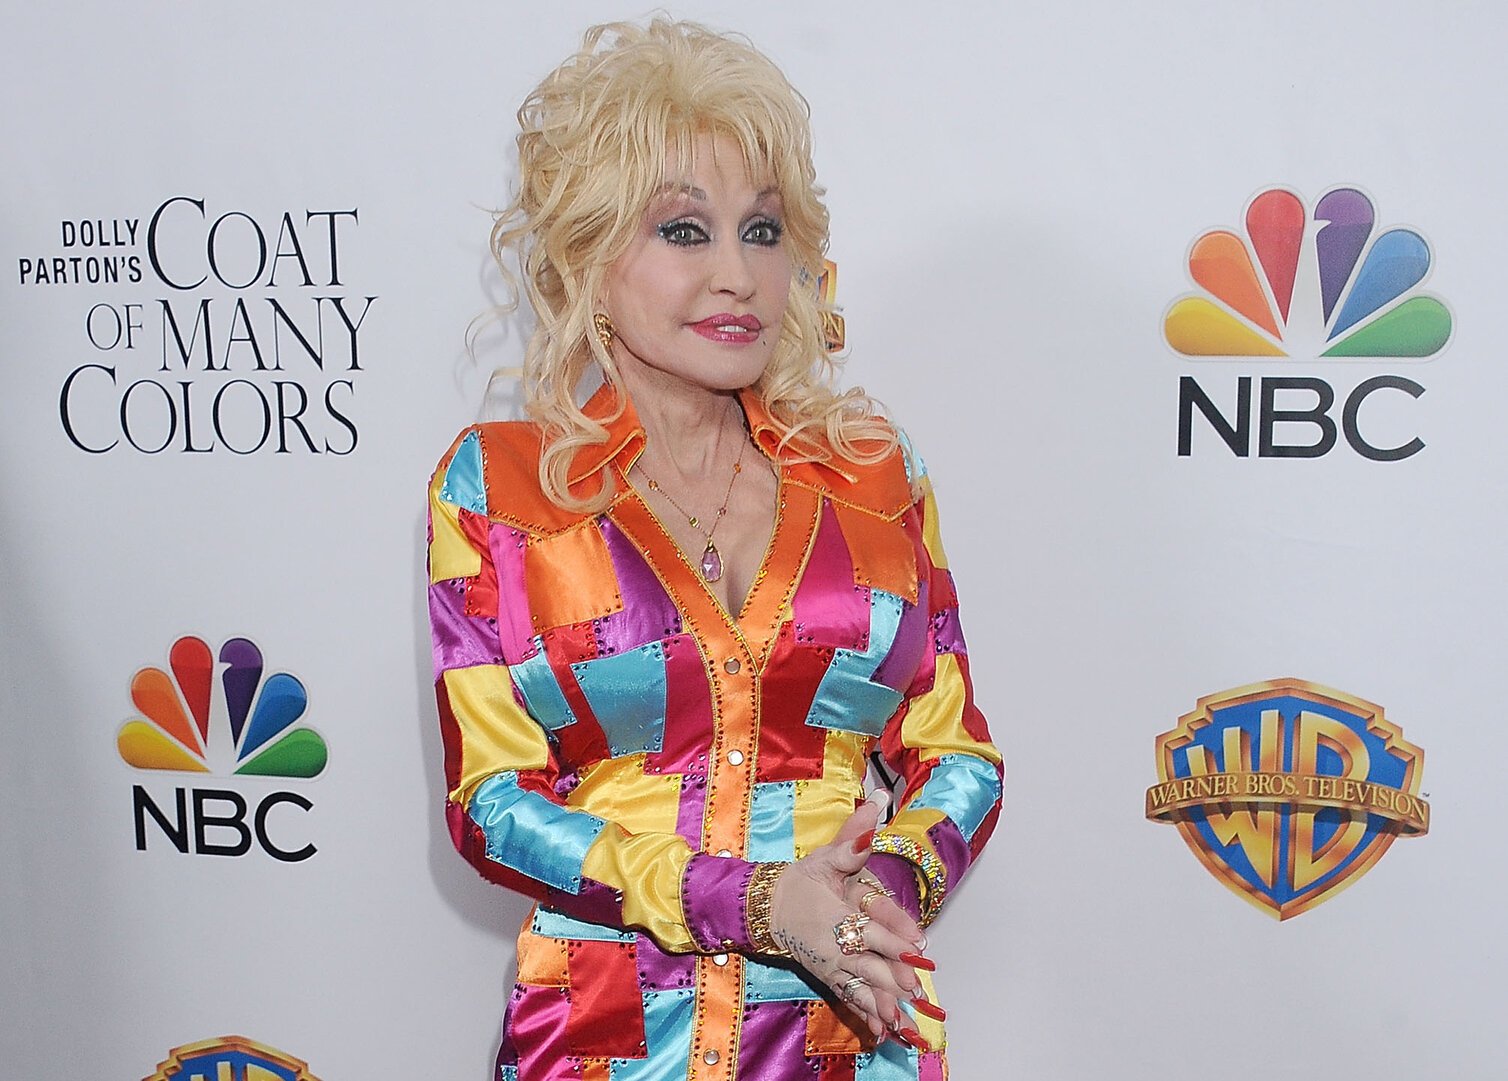 Dolly Parton at the Premiere Of Warner Bros. Television's "Dolly Parton's Coat Of Many Colors" in a multi-colored coat dress.